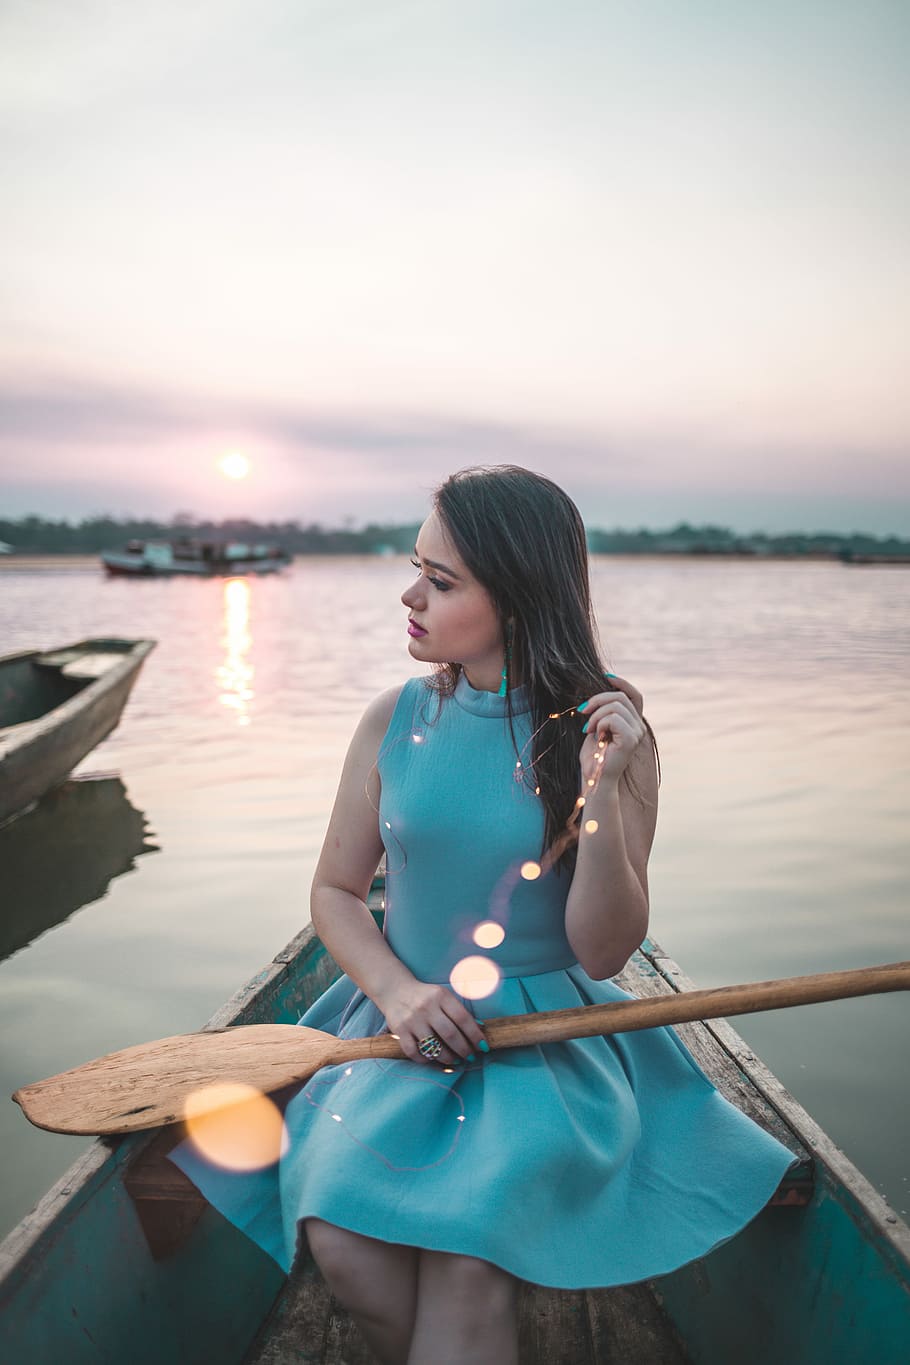 woman sitting on boat holding paddle, woman sitting on blue boat while holding brown wooden paddle on lap, HD wallpaper